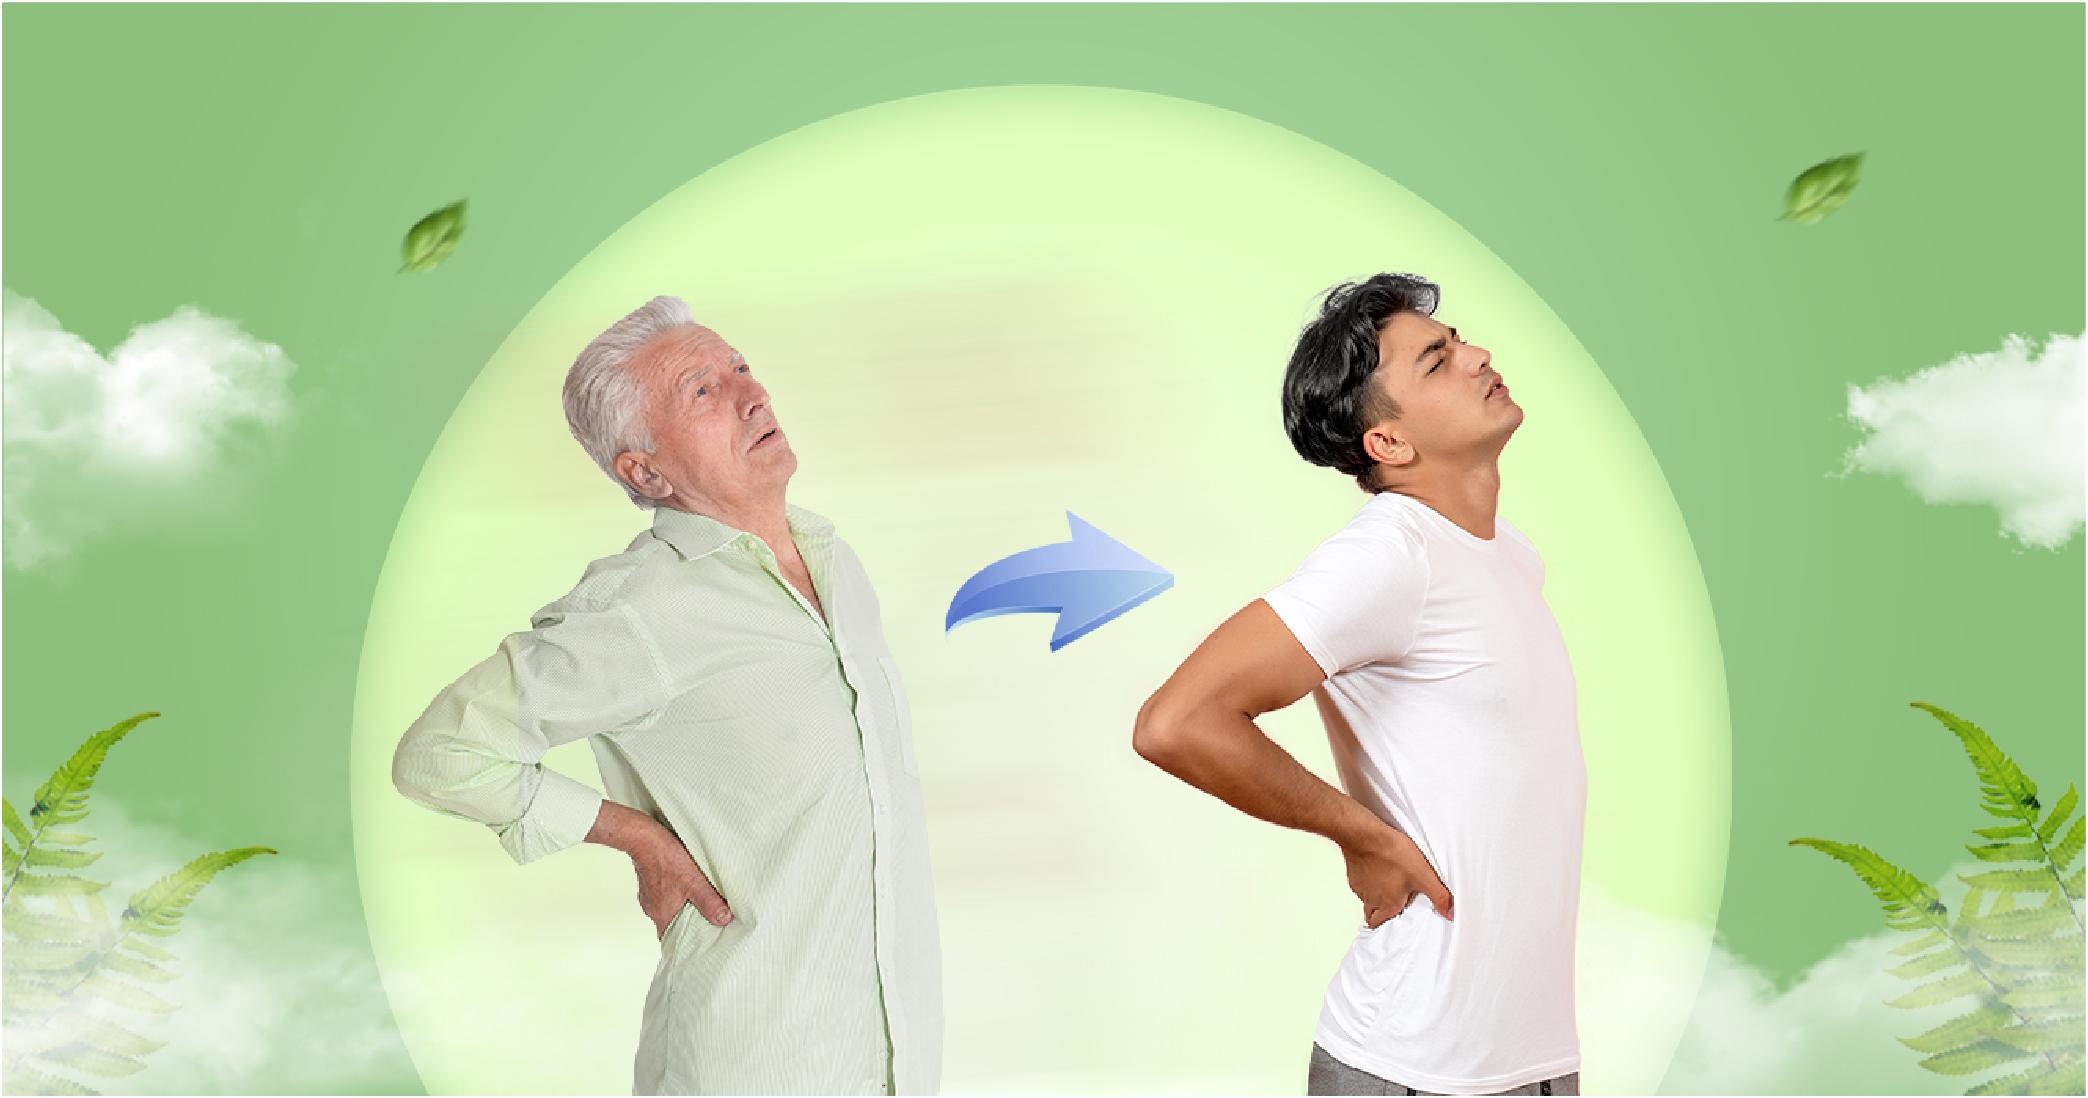 BACK PAIN - THE AILMENT OF THE ELDERLY BUT IS NOW INCREASINGLY AFFECTING YOUNGER INDIVIDUALS, WHAT IS THE CAUSE?